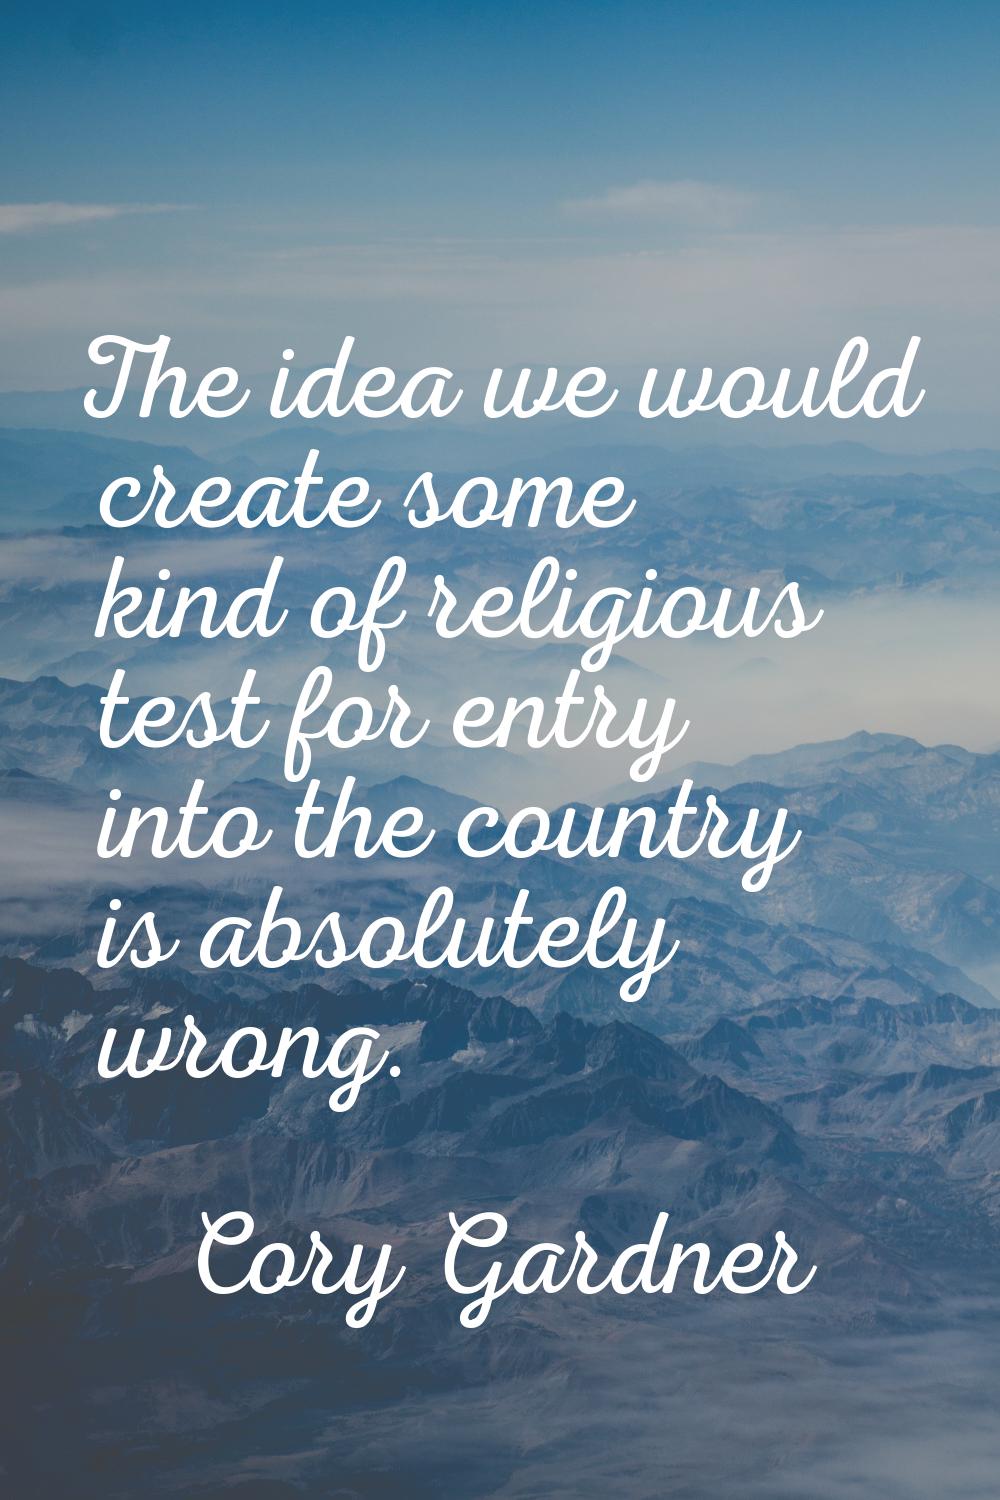 The idea we would create some kind of religious test for entry into the country is absolutely wrong